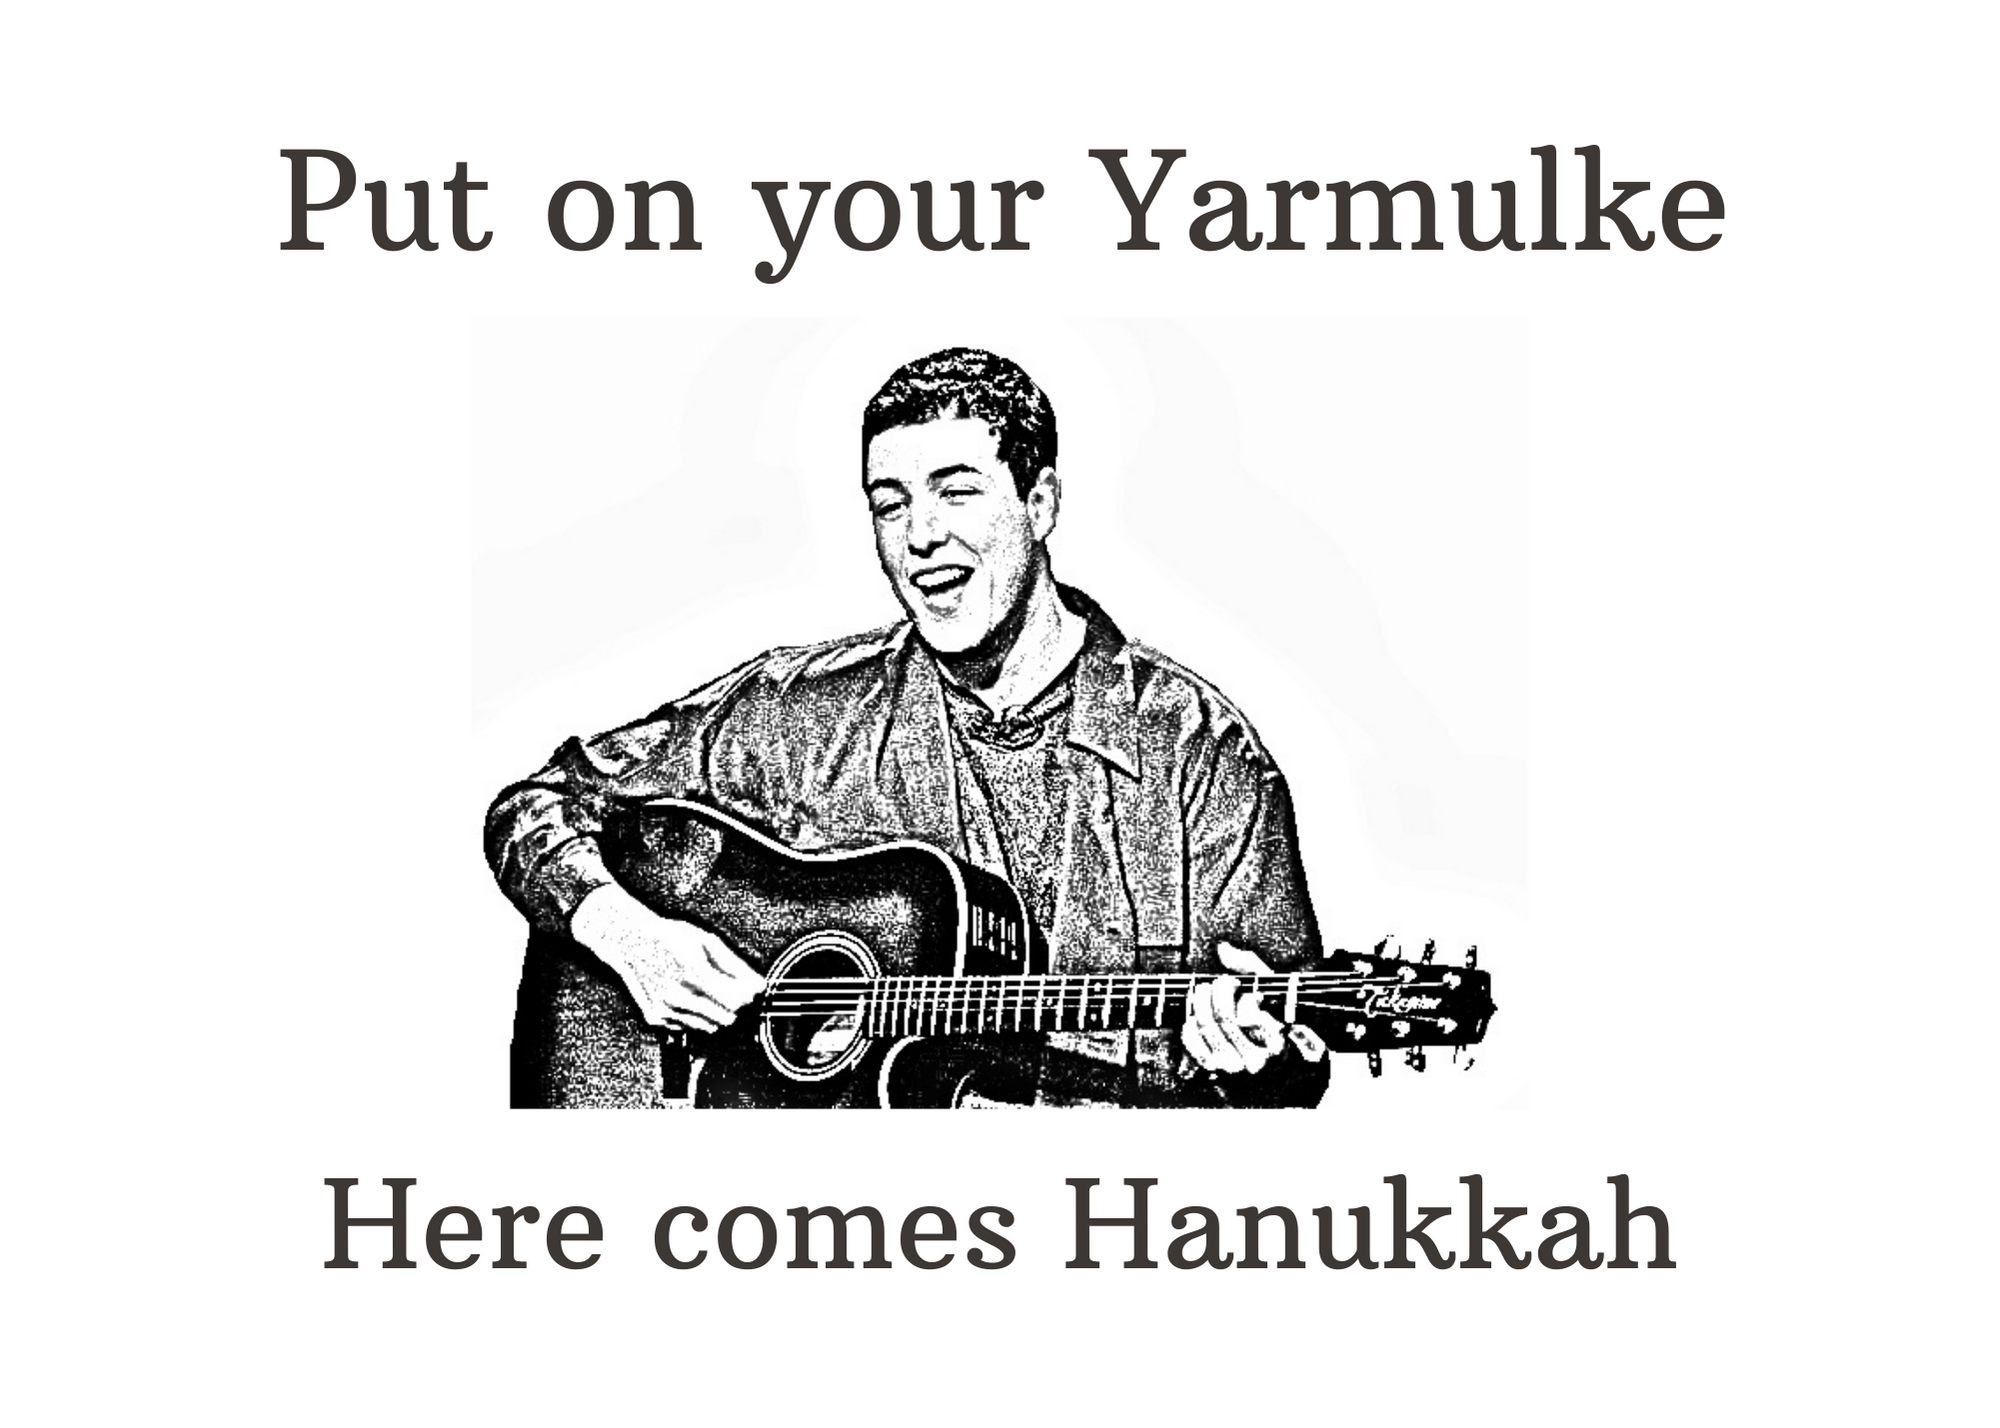 White seed paper greeting card says "Put on your Yarmulke, Here comes Hanukkah" with Adam Sandler